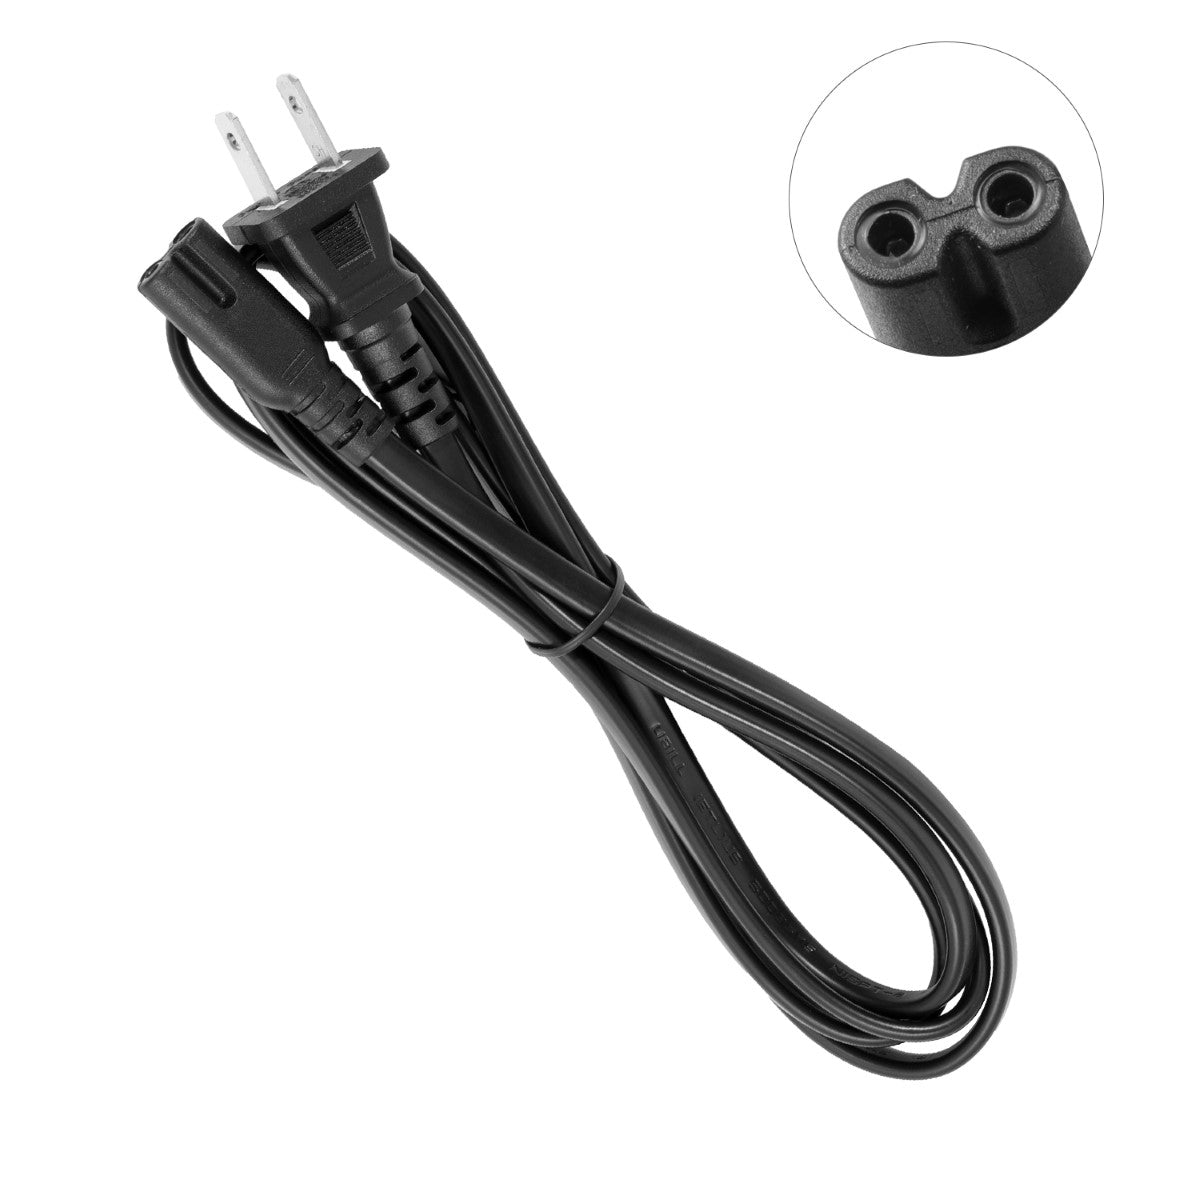 Power Cable for HP ENVY 5055 Wireless Printer.